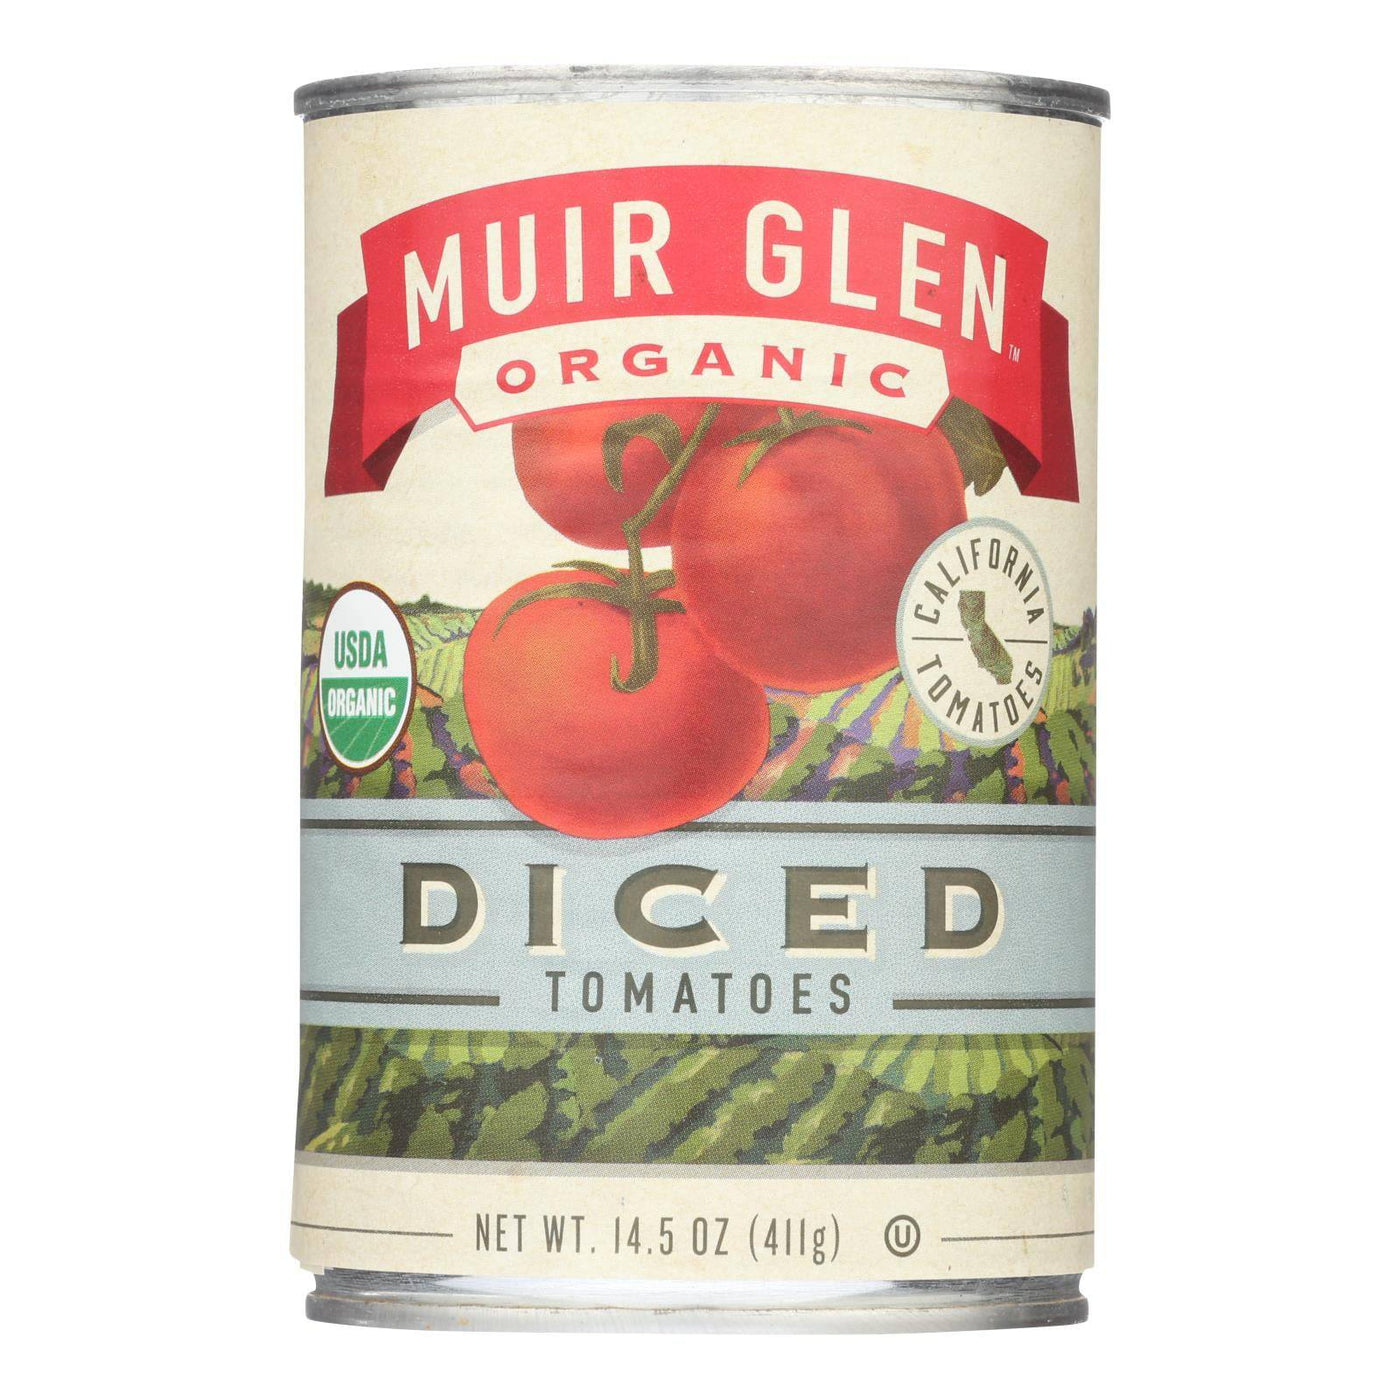 Buy Muir Glen Organic Tomatoes Diced - Tomatoes - Case Of 12 - 14.5 Oz.  at OnlyNaturals.us